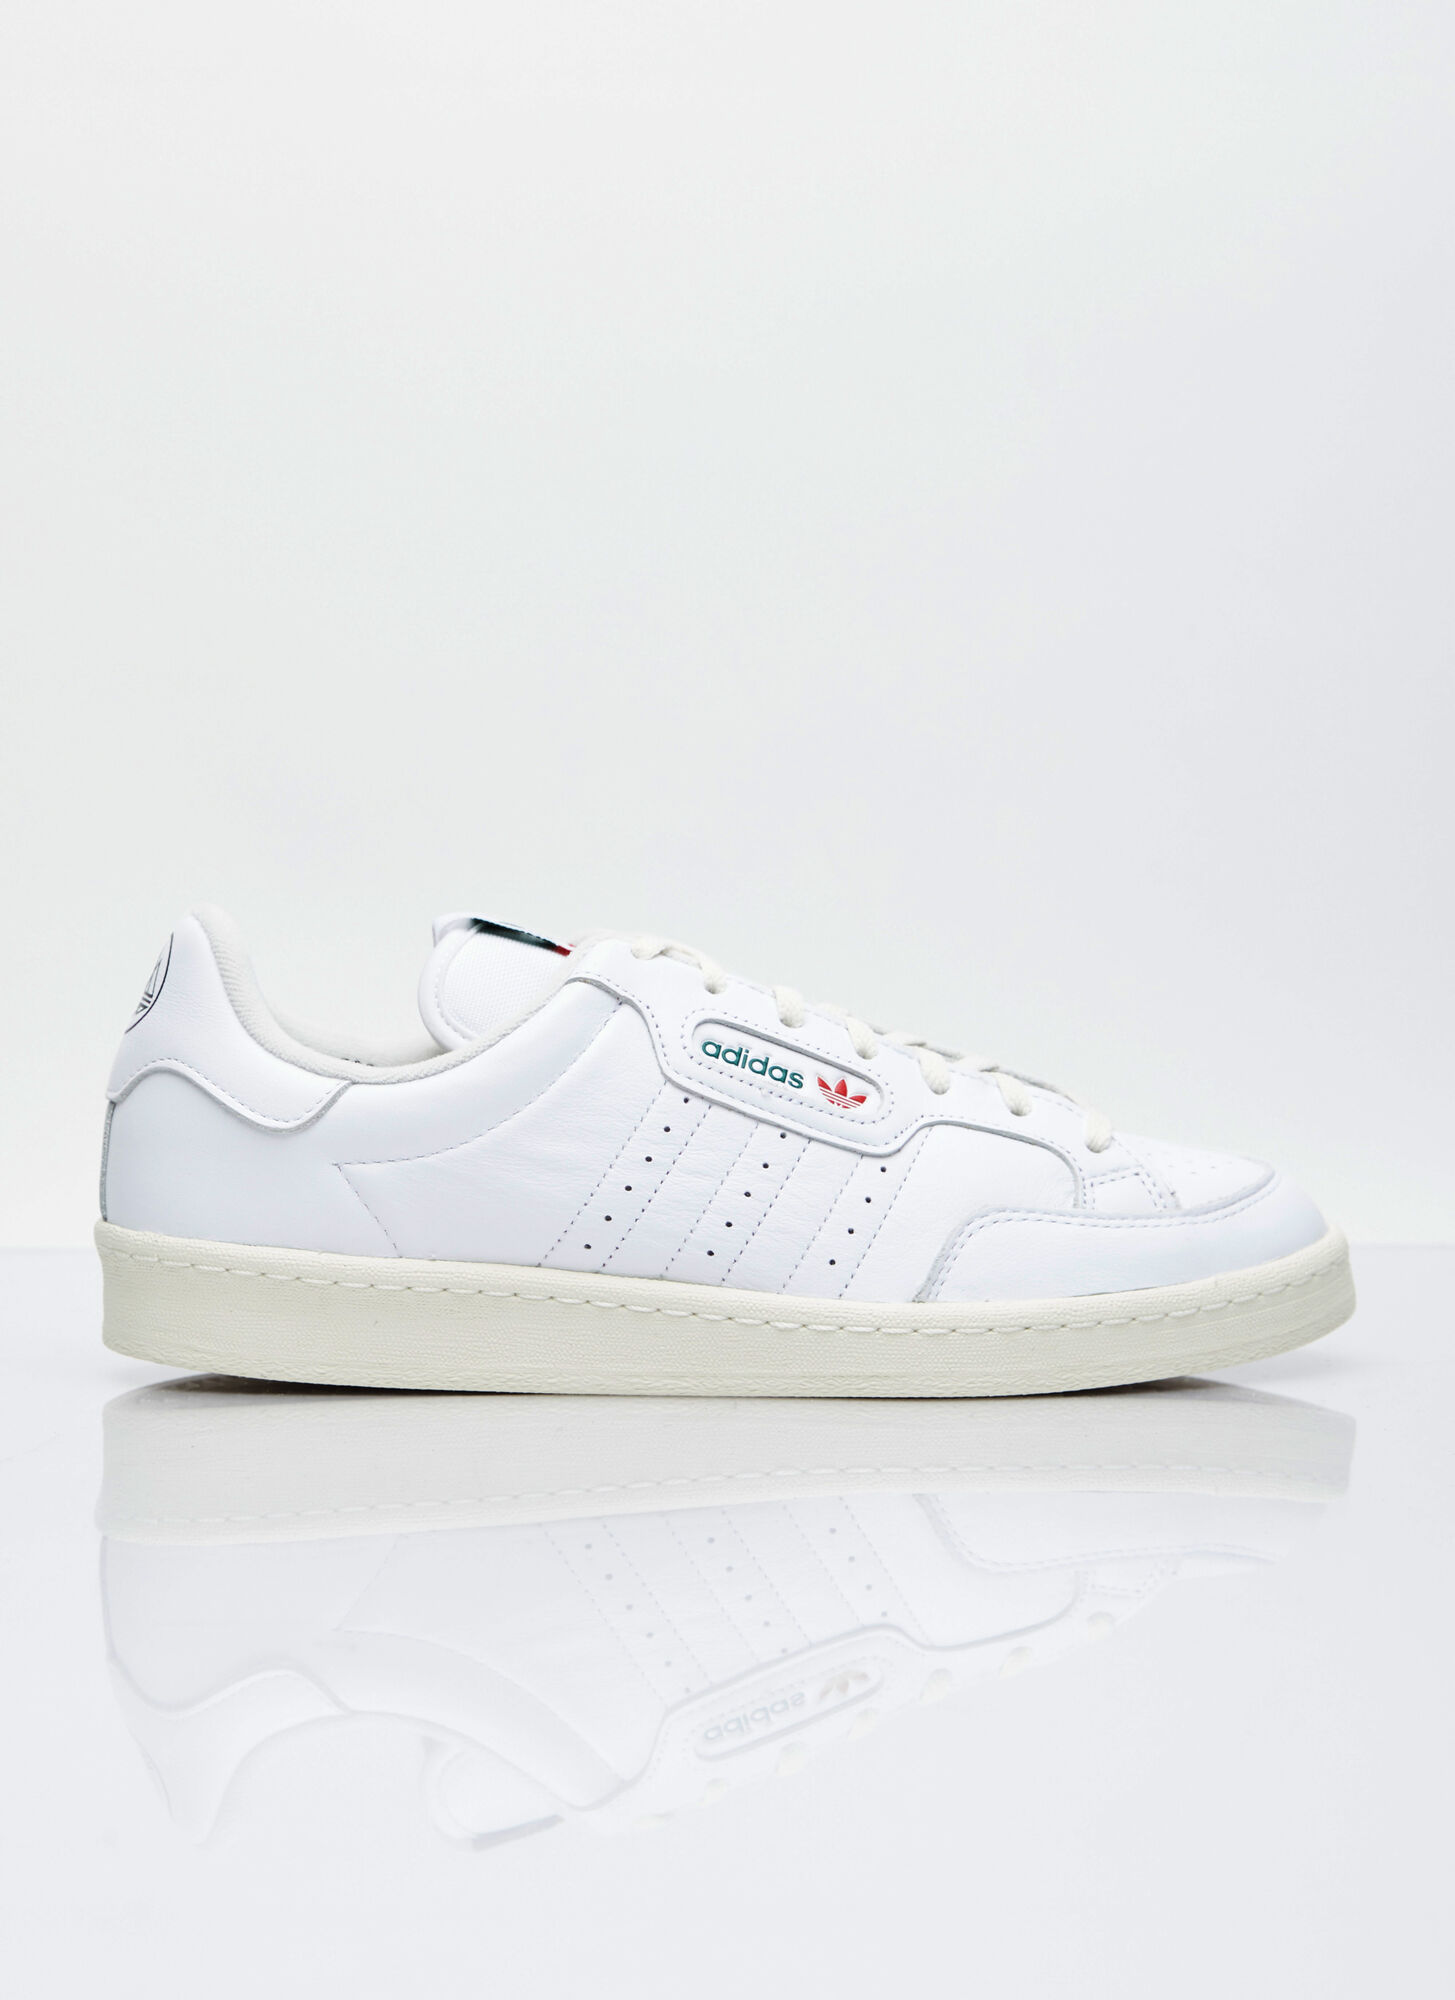 Shop Adidas Originals By Spezial Englewood Spezial Sneakers In White